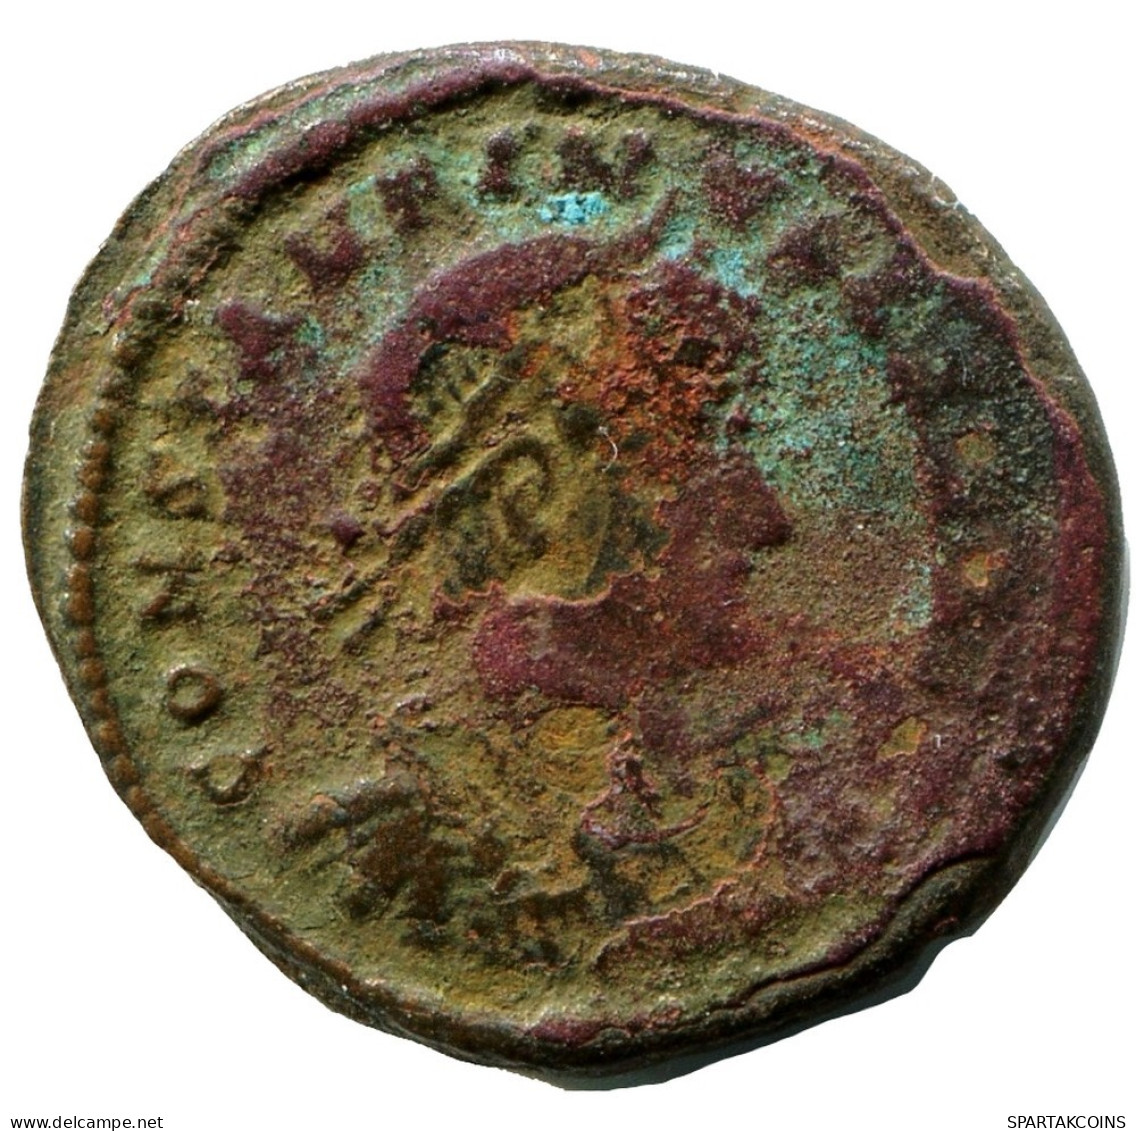 CONSTANTINE I MINTED IN CYZICUS FROM THE ROYAL ONTARIO MUSEUM #ANC10967.14.U.A - El Imperio Christiano (307 / 363)